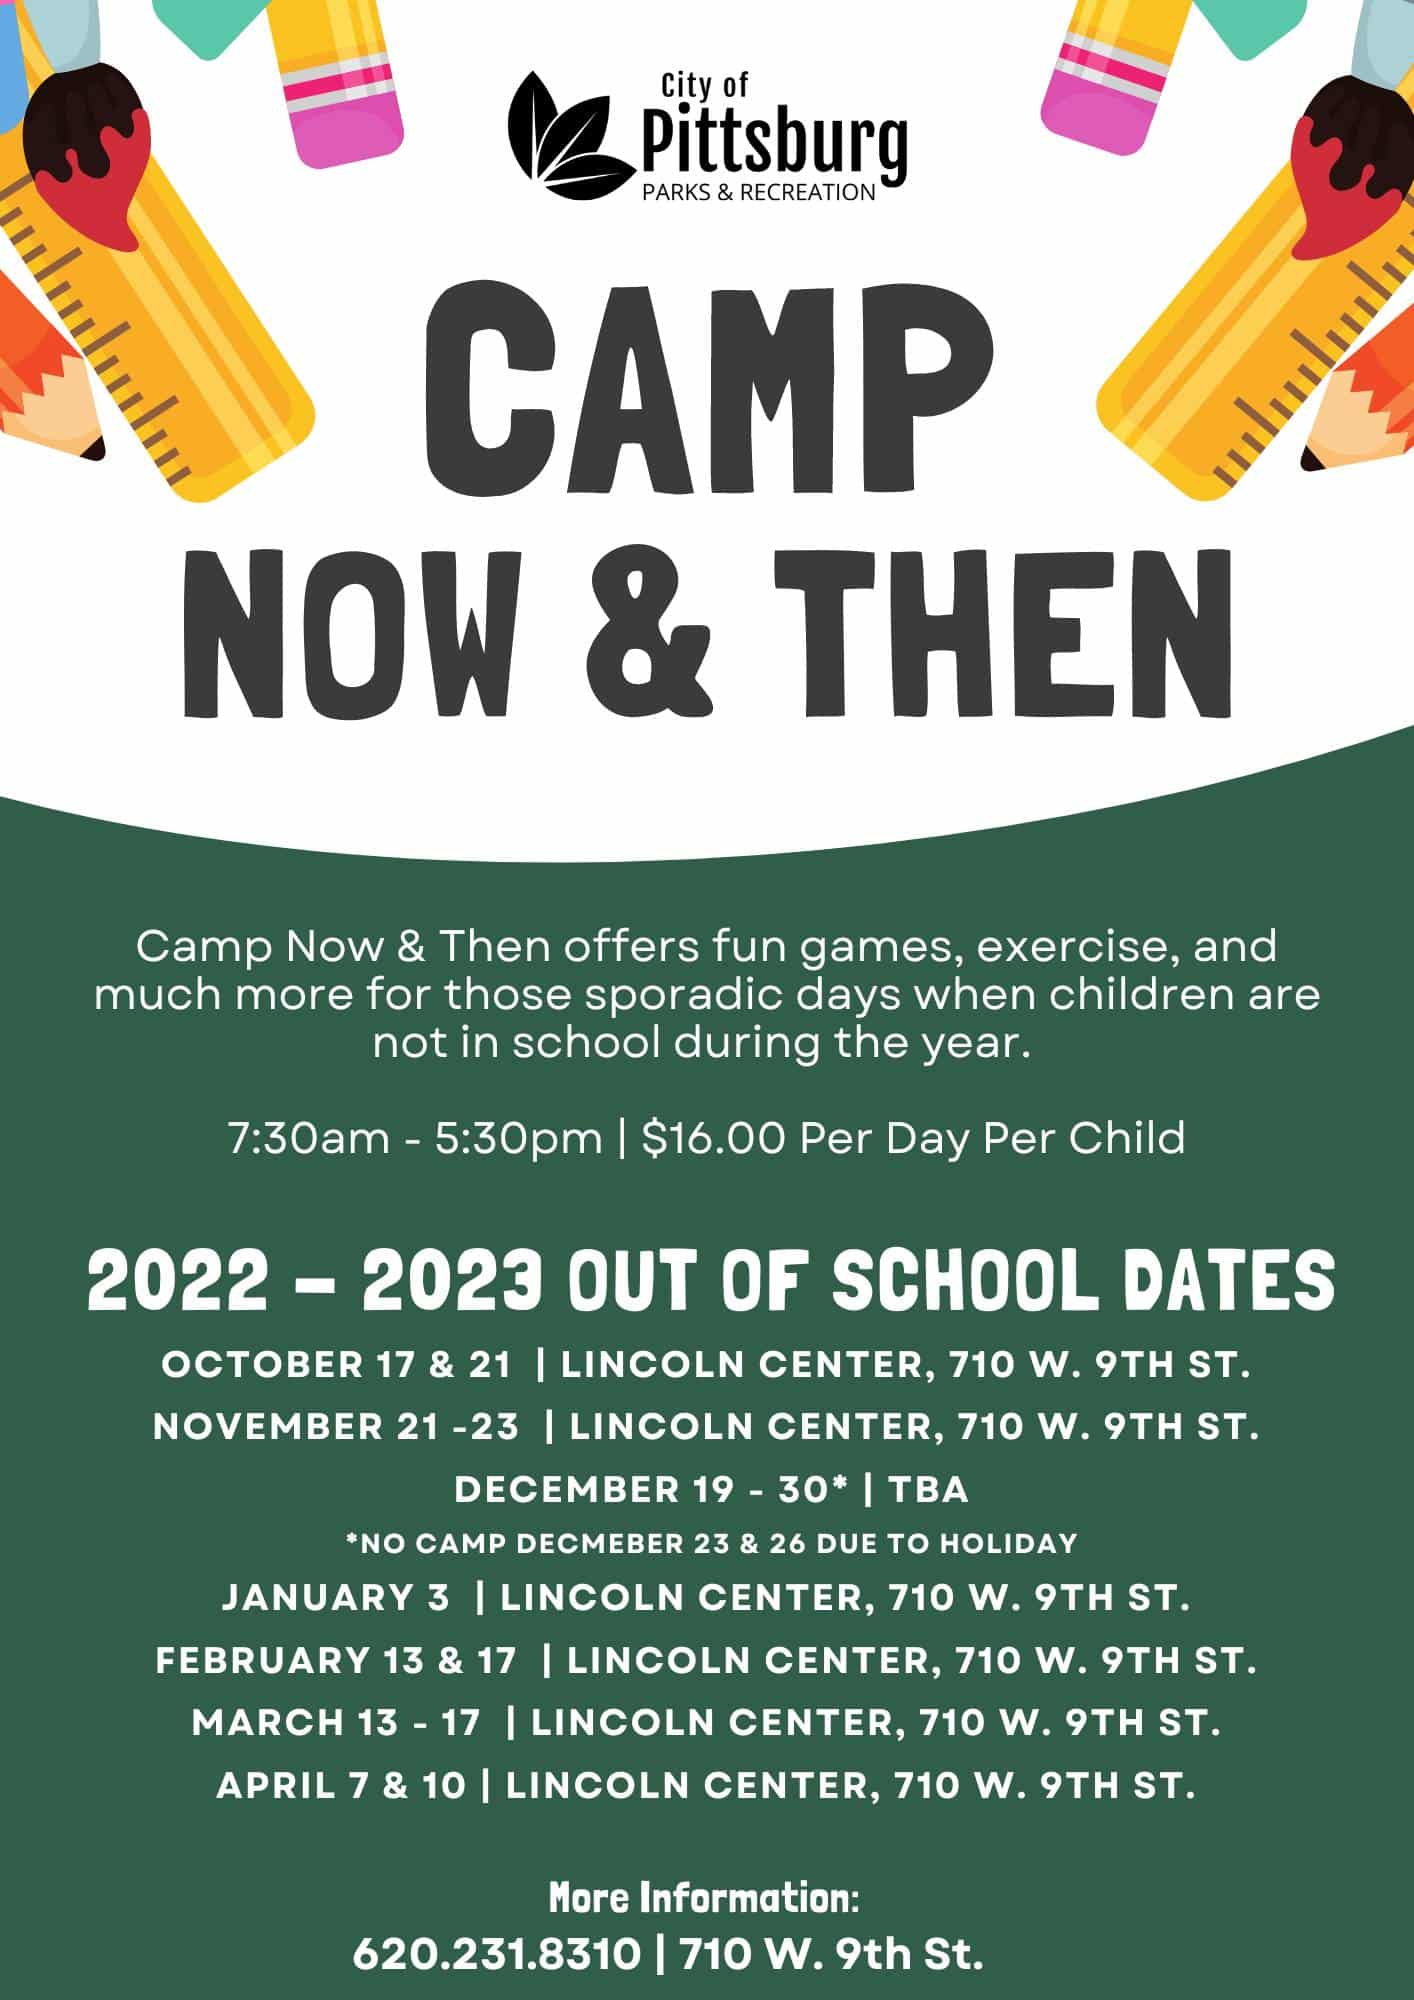 Camp Now & Then